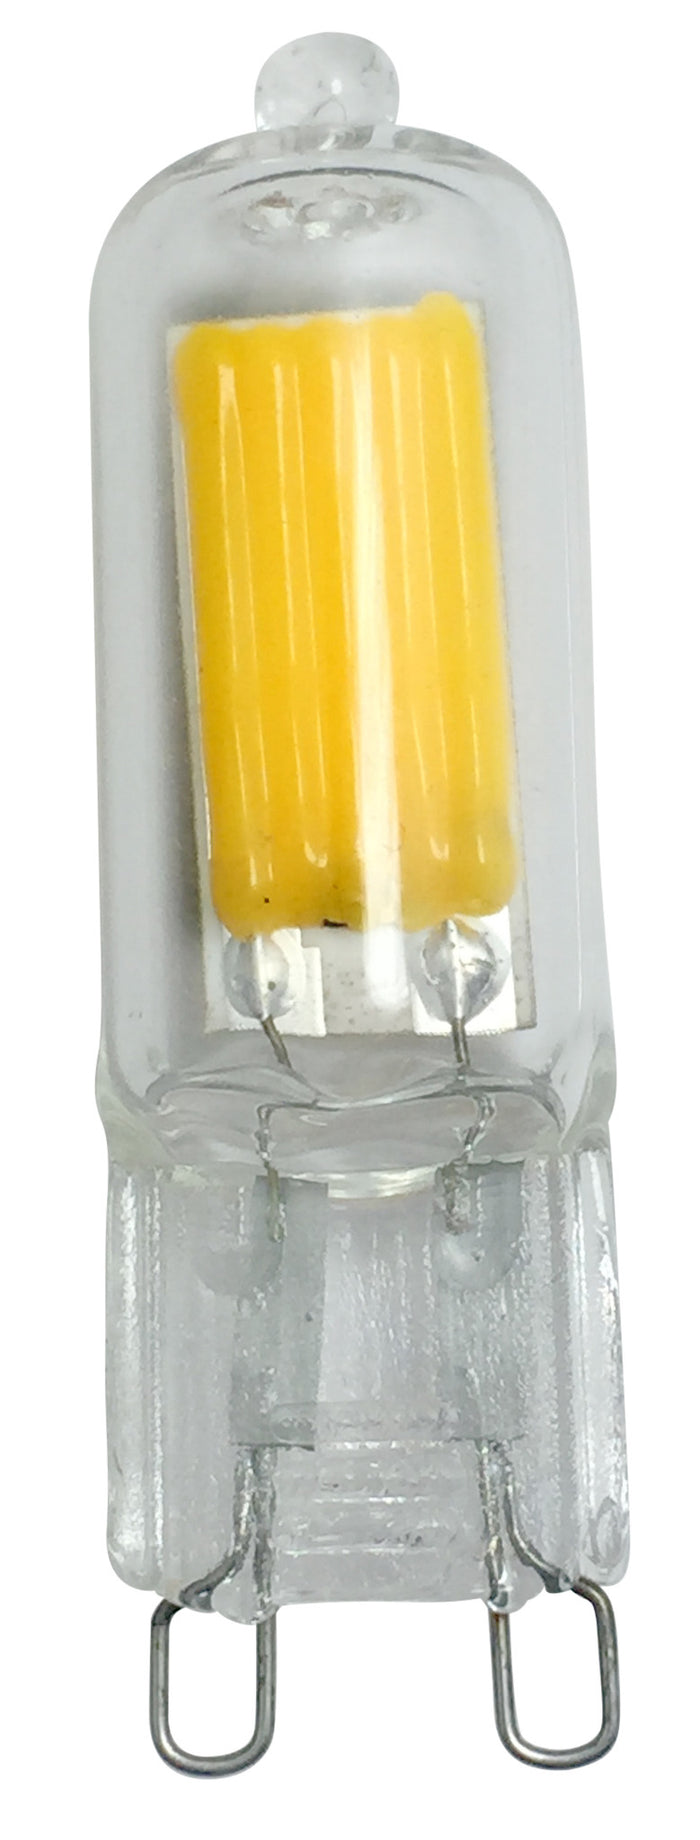 Girard Sudron 161156 - Specific LED G9 2W 3000K 200Lm